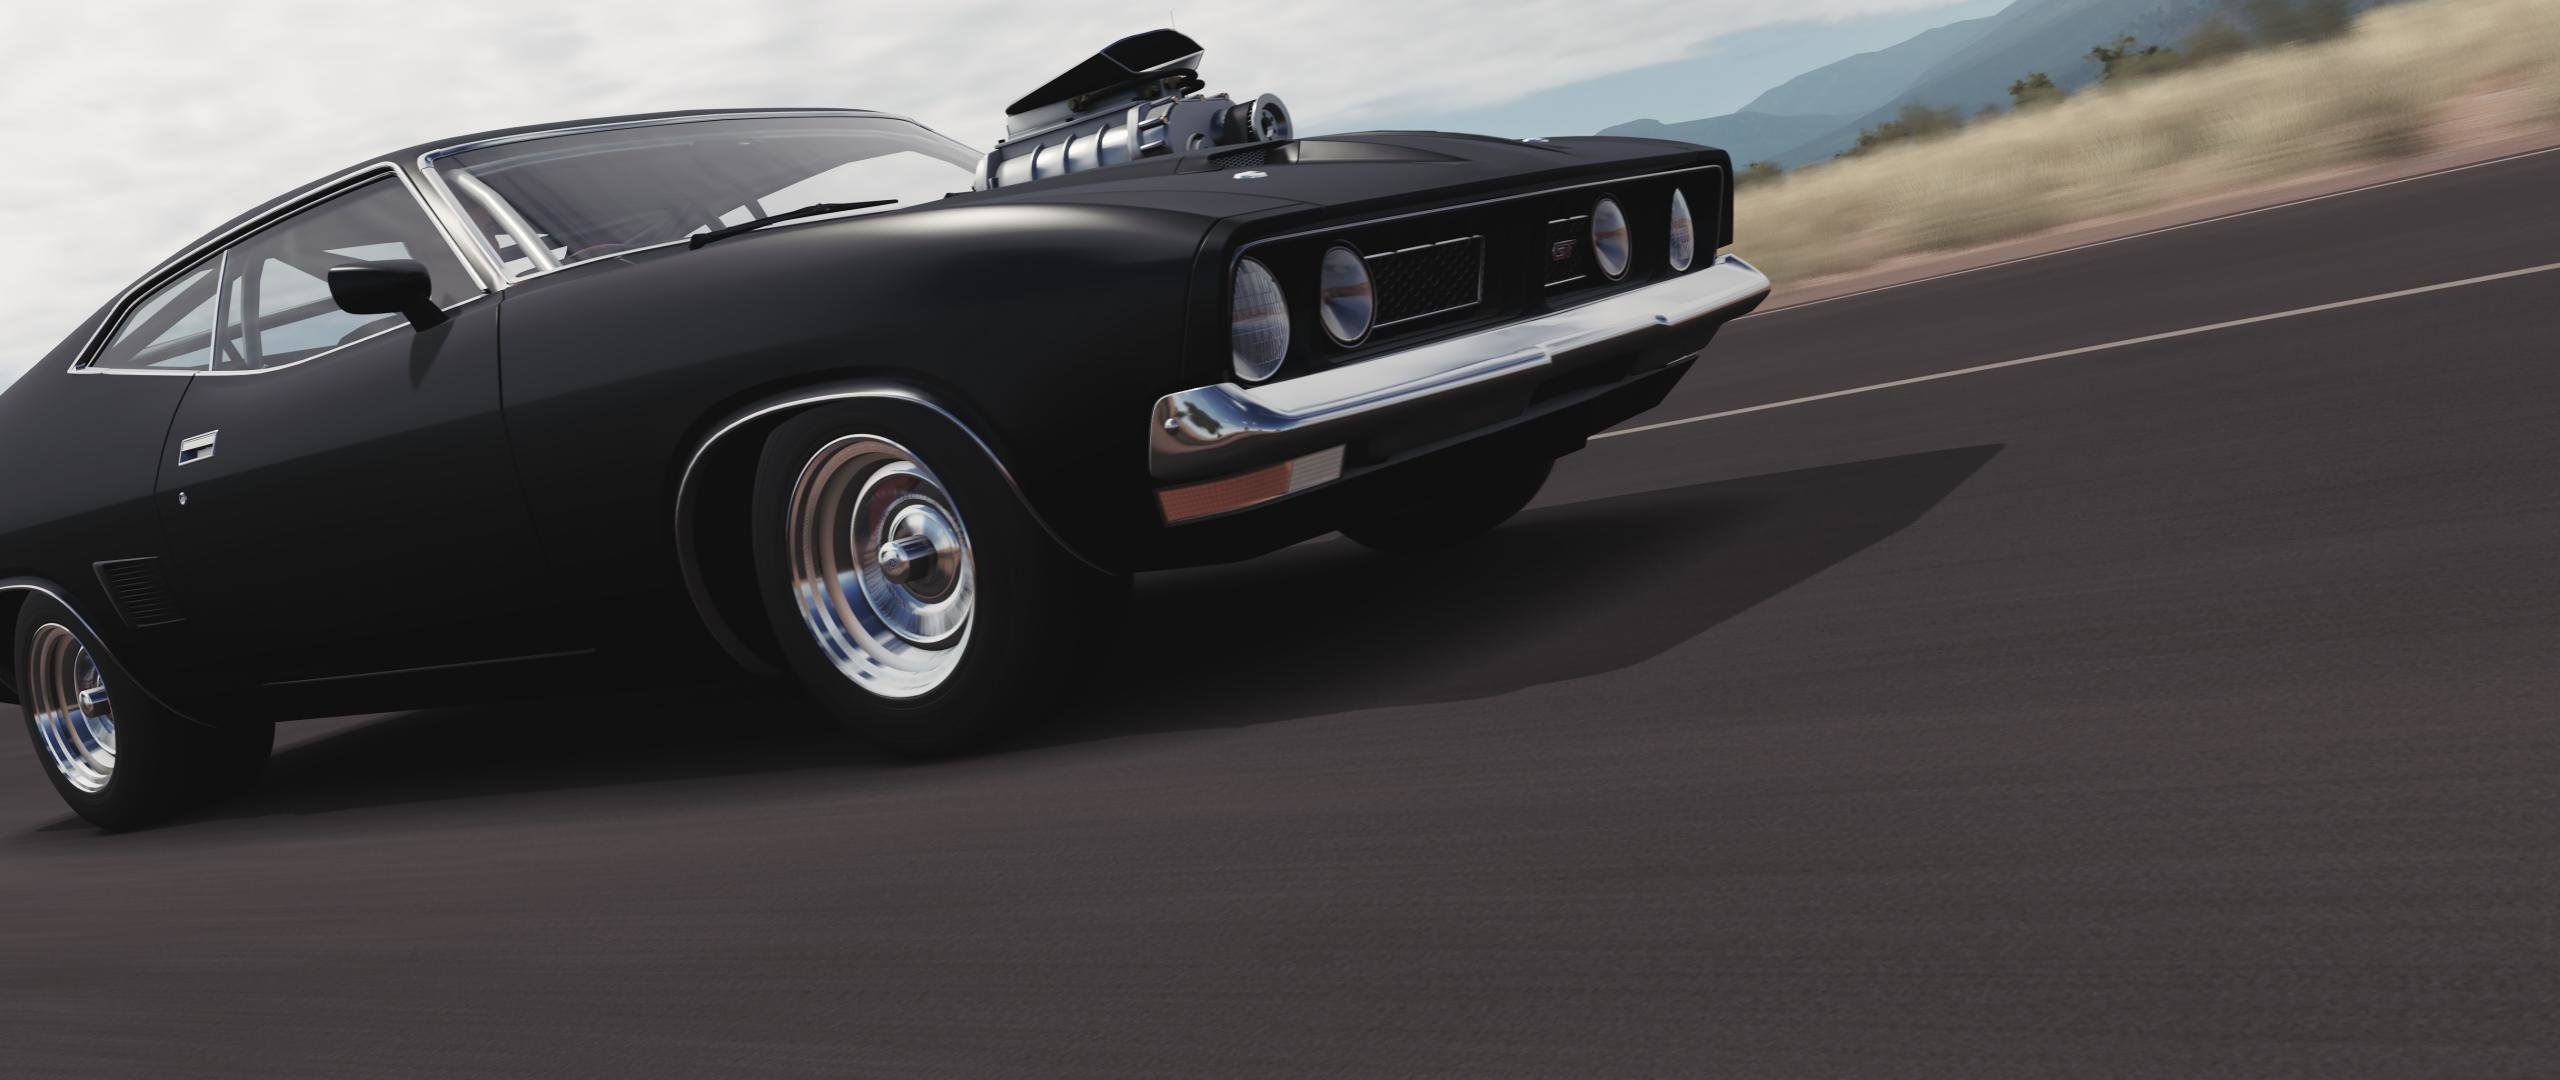 Free Muscle Car high quality wallpaper ID:466153 for hd 2560x1080 desktop